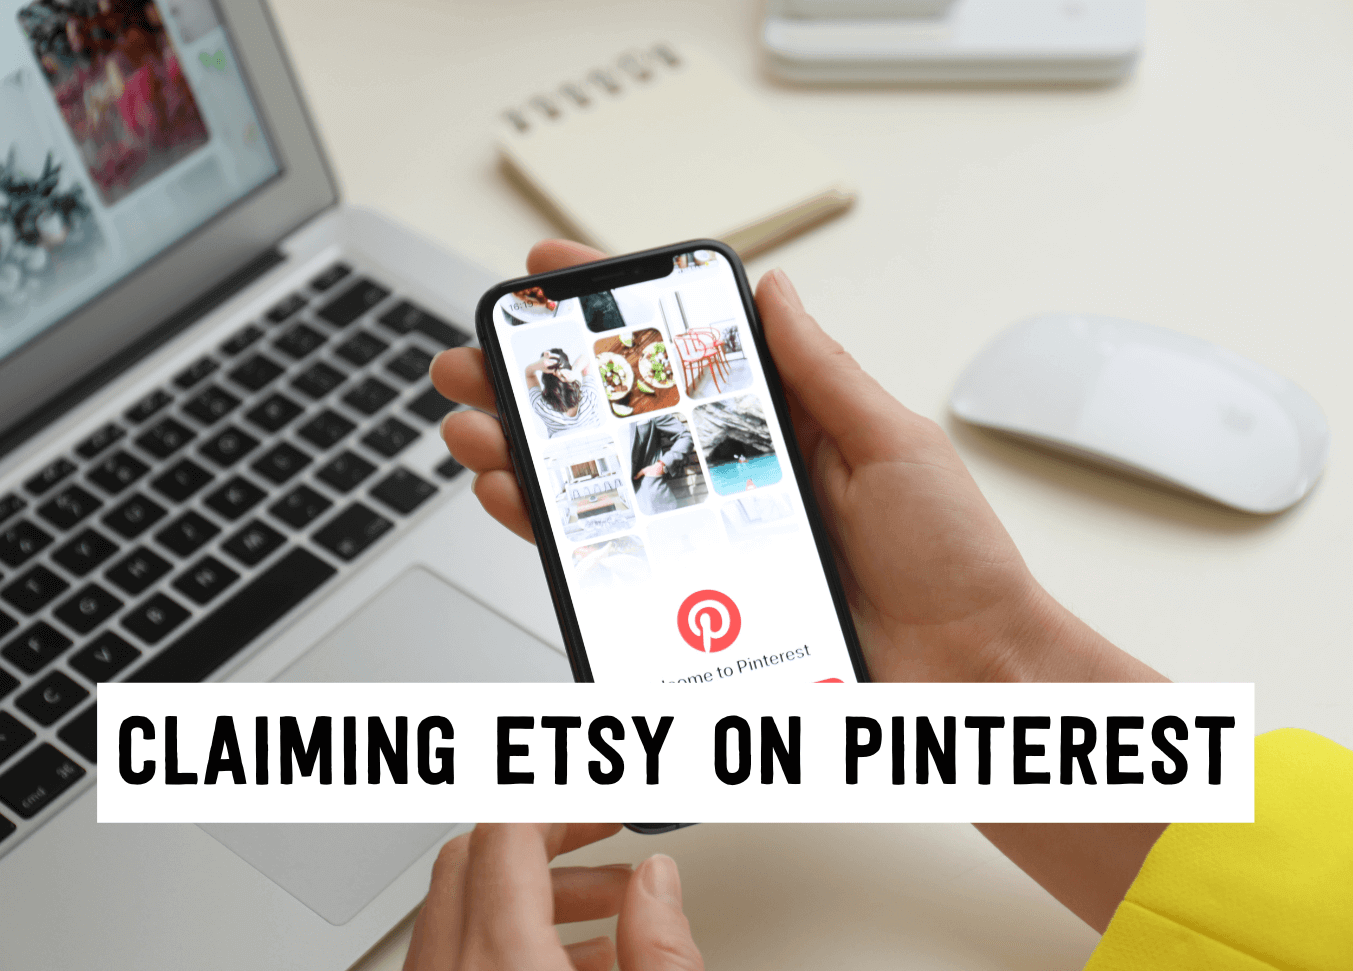 Claiming etsy on pinterest | Tizzit.co - start and grow a successful handmade business